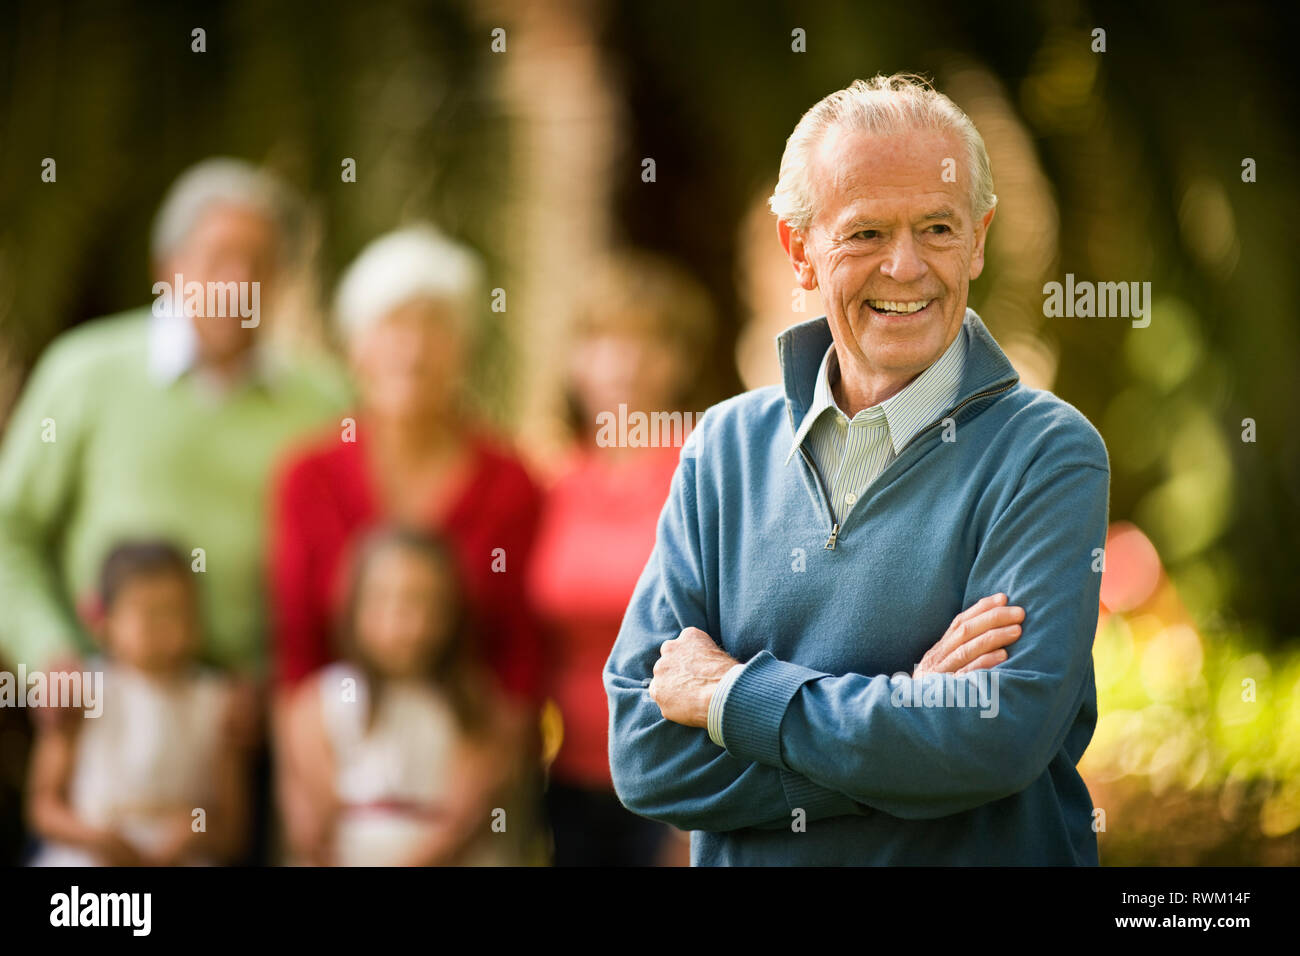 Senior man smiles proudly and stands with his arms crossed as he poses for a portrait with his family in the background. Stock Photo